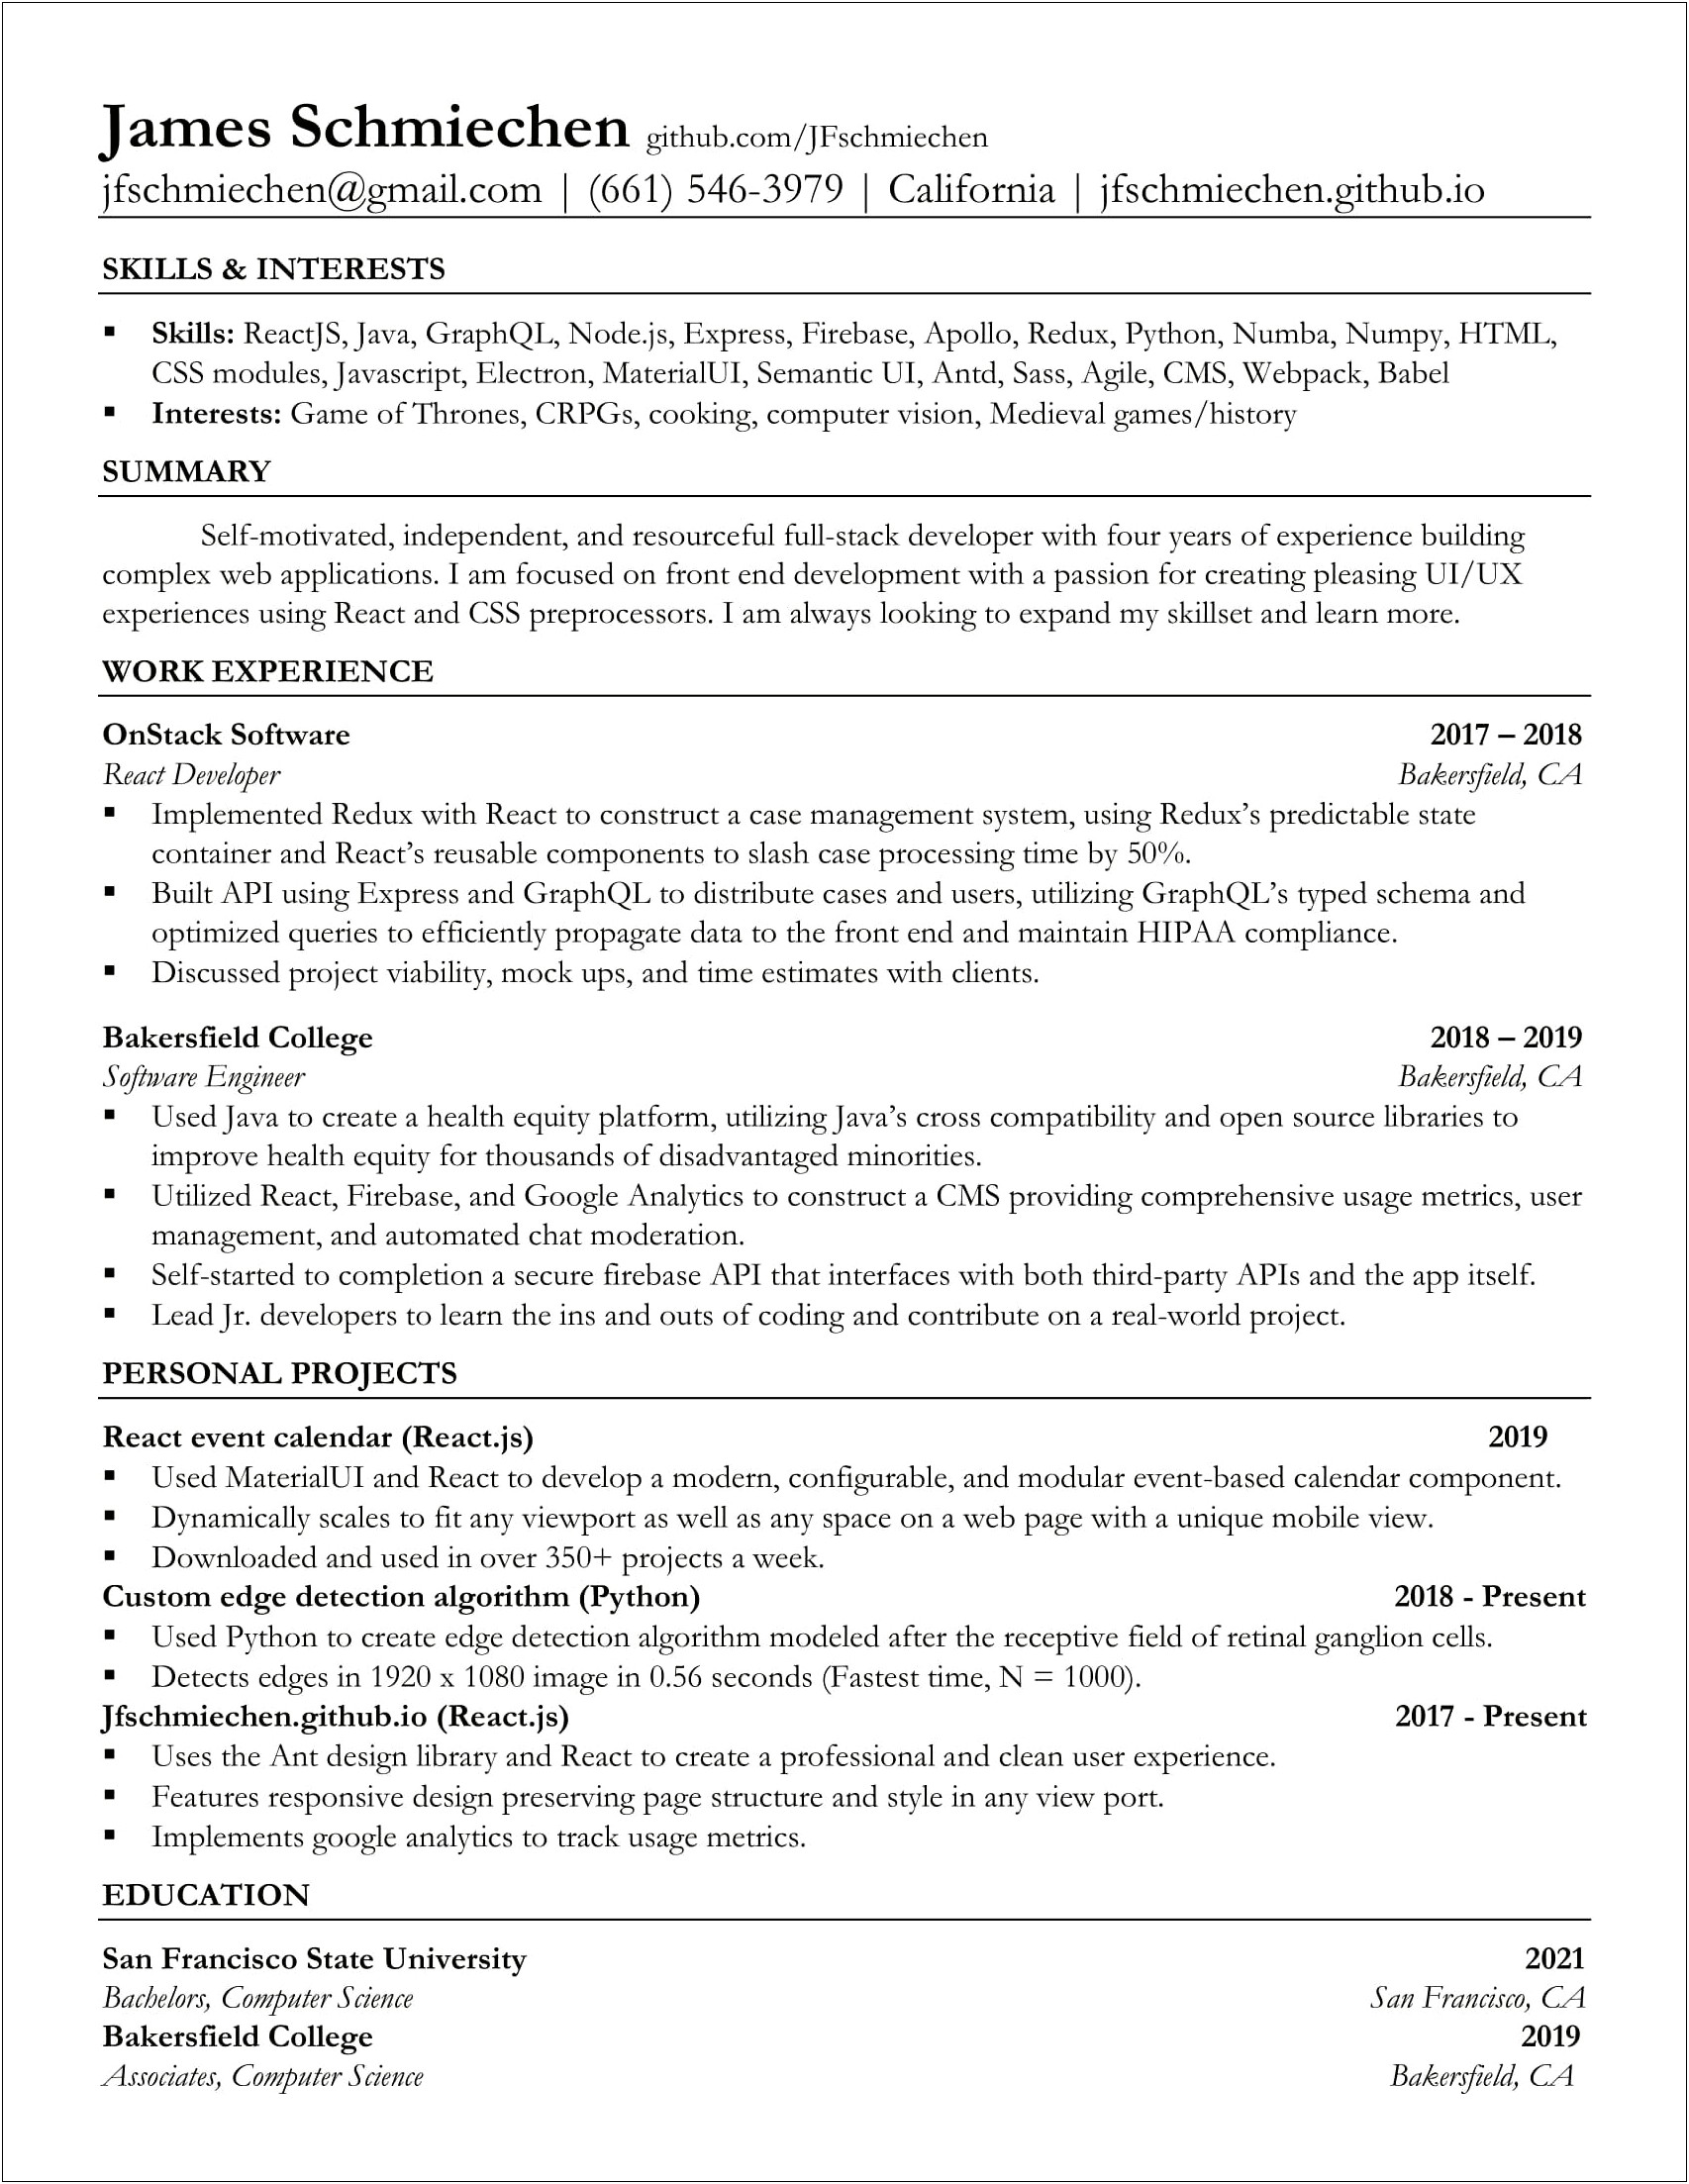 Update Job Experience In Resume Automatically